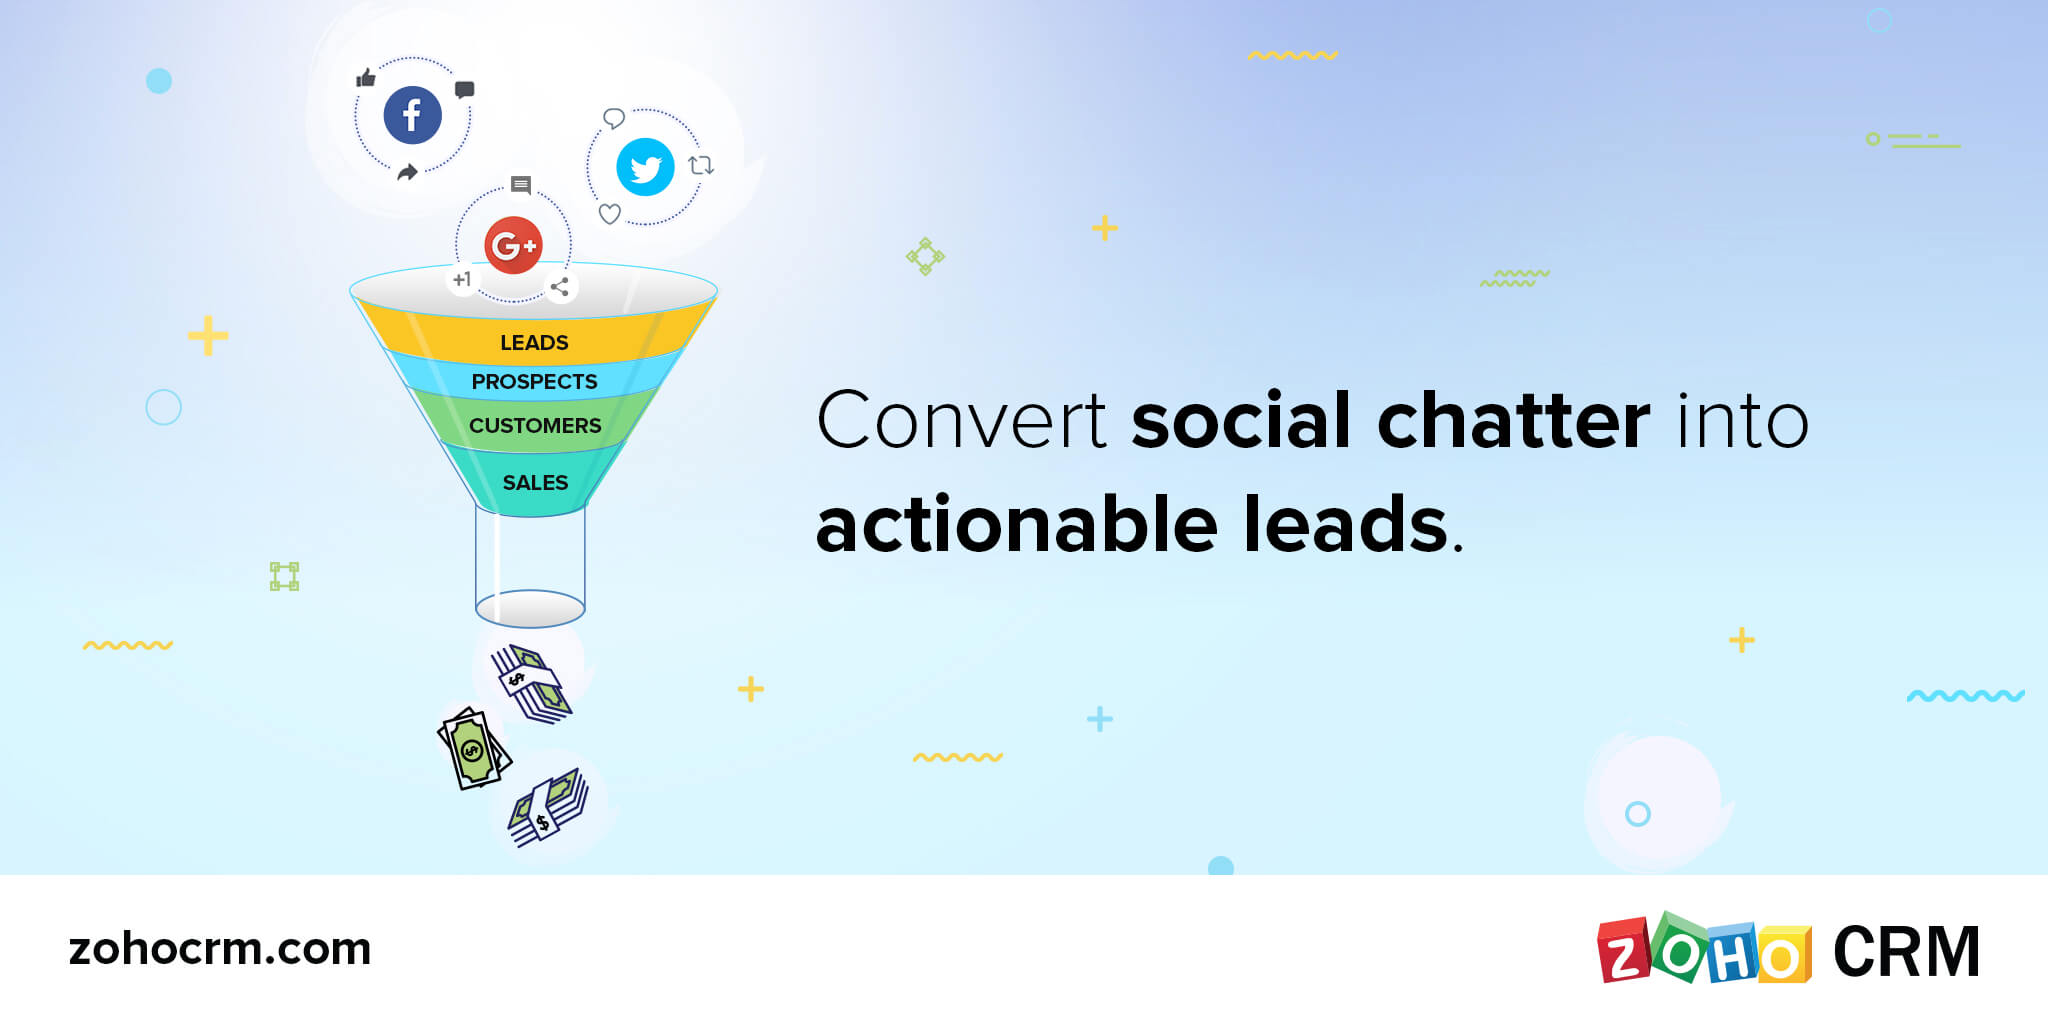 Convert social chatter into actionable leads